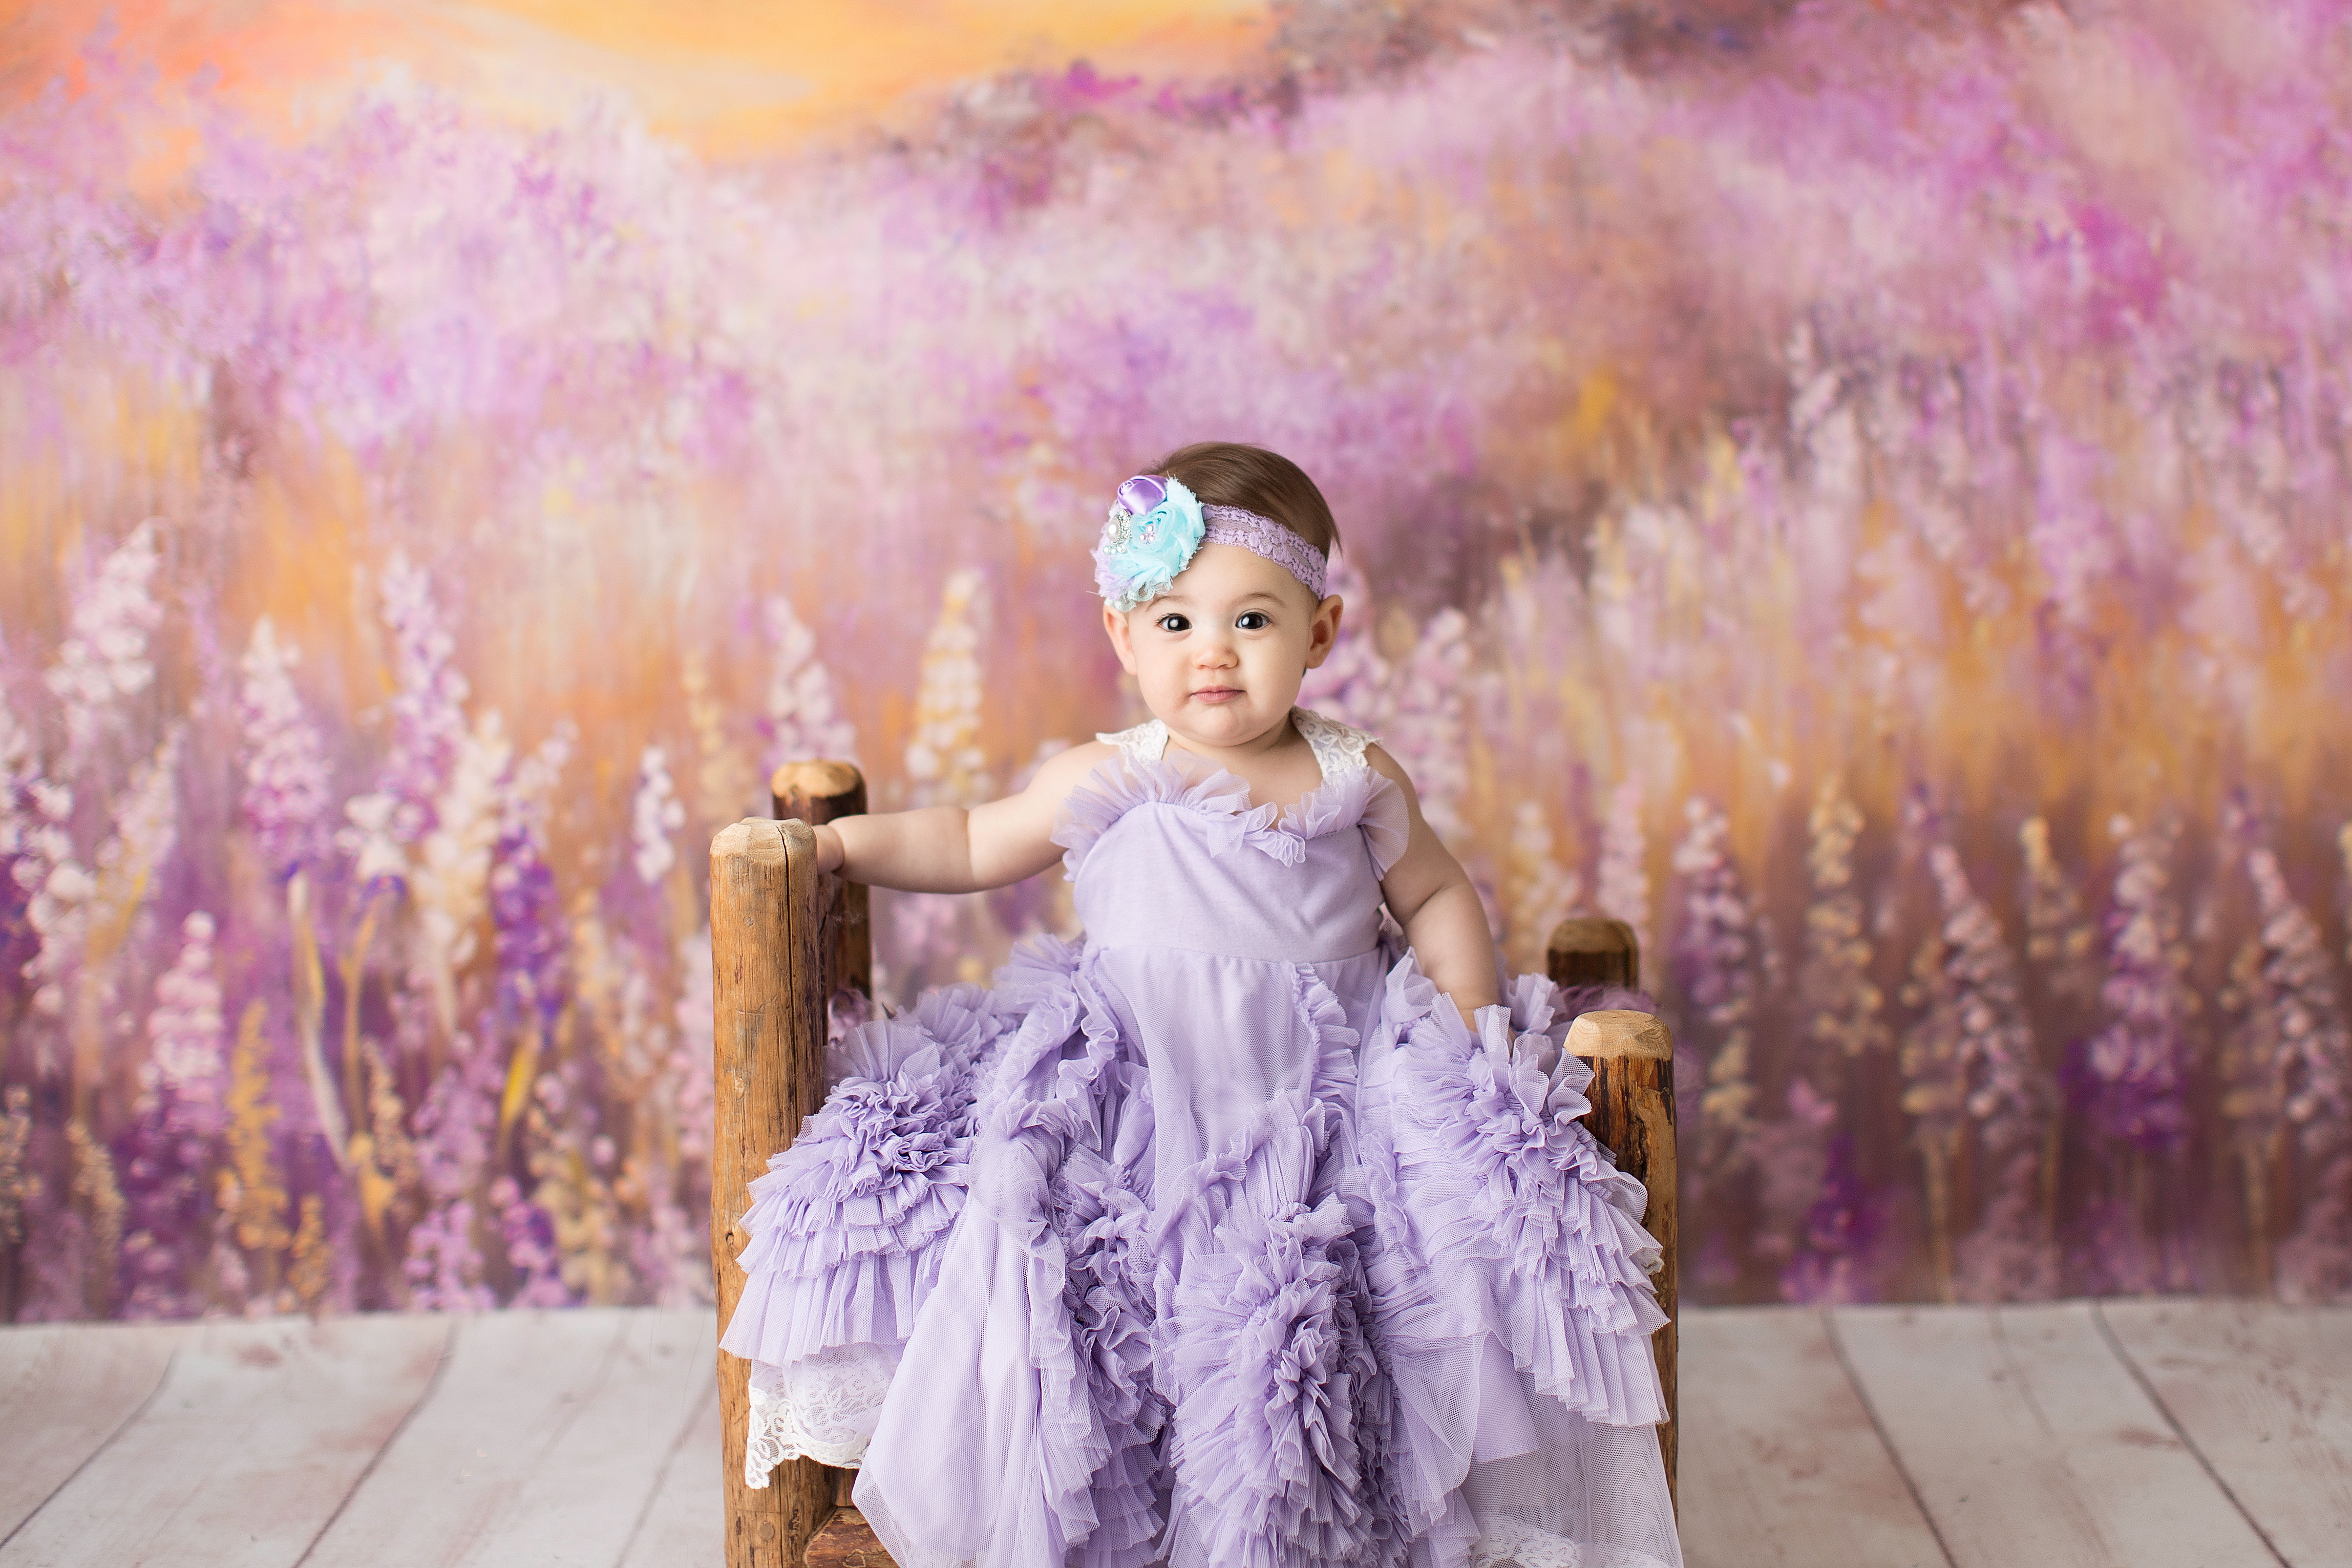 Brooks | 6 Month Photography - Megan O'Hare Photography